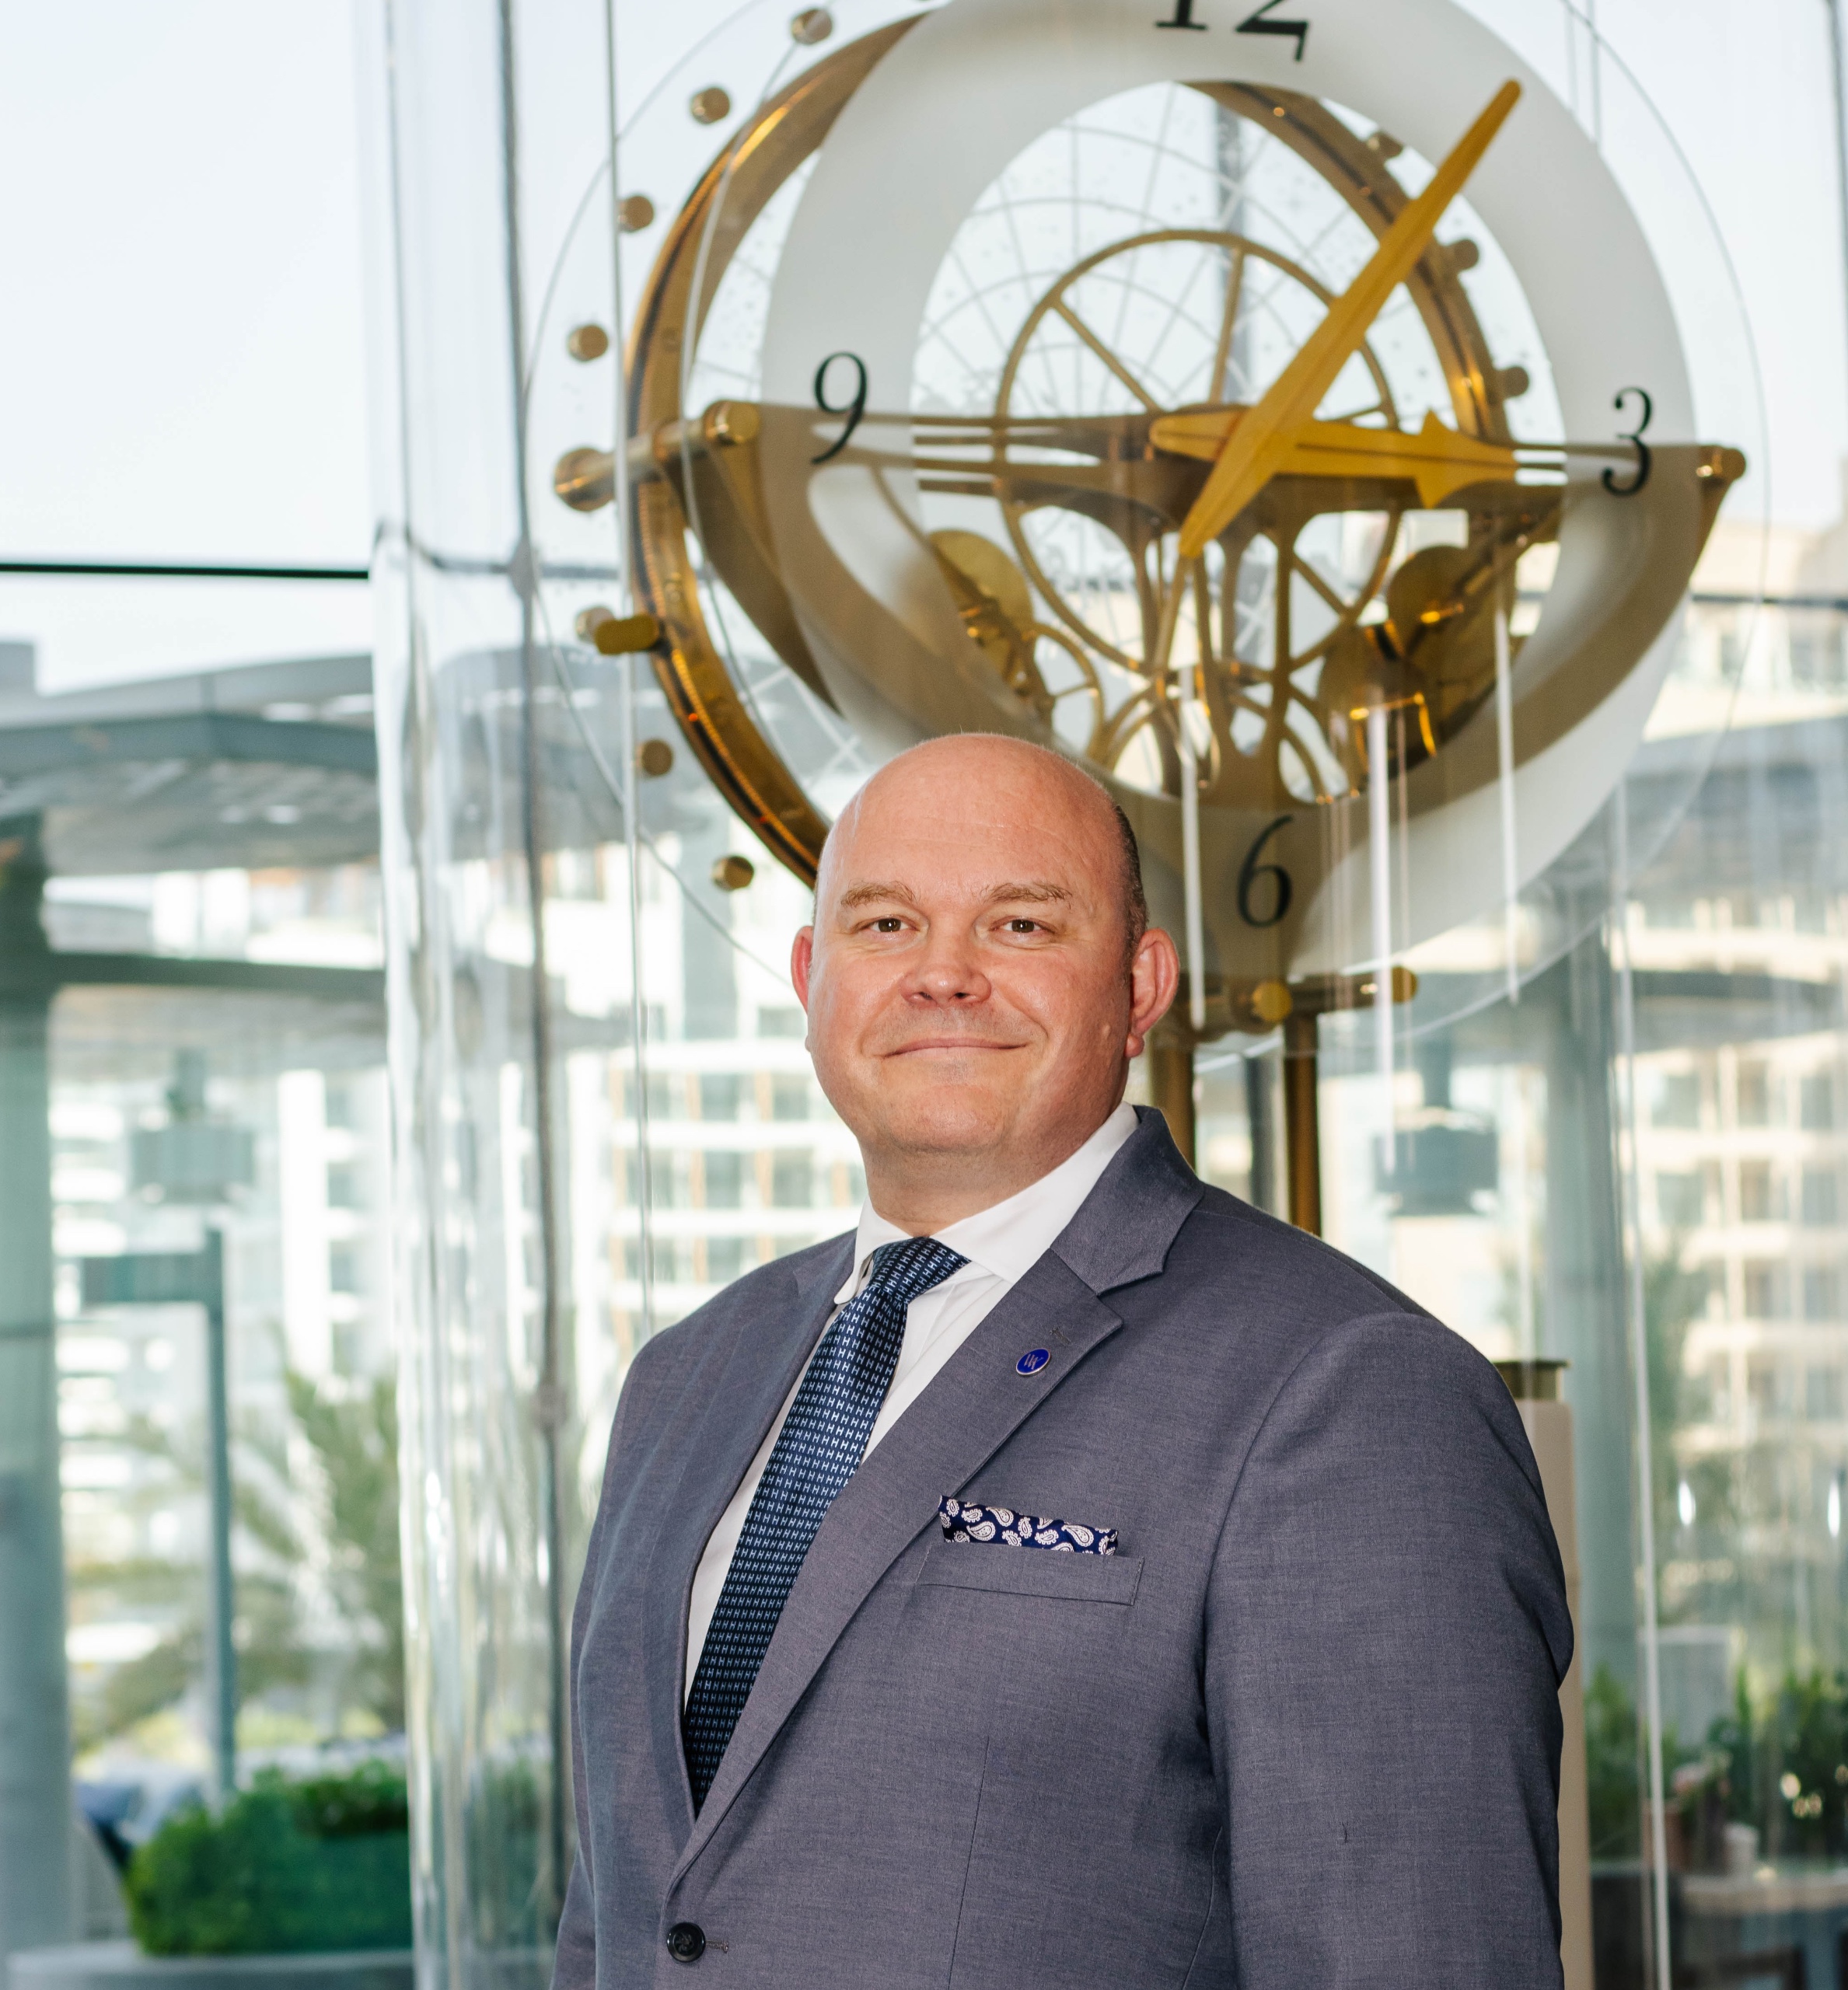 WALDORF ASTORIA LUSAIL, DOHA APPOINTS ALEX WILLATS AS GENERAL MANAGER